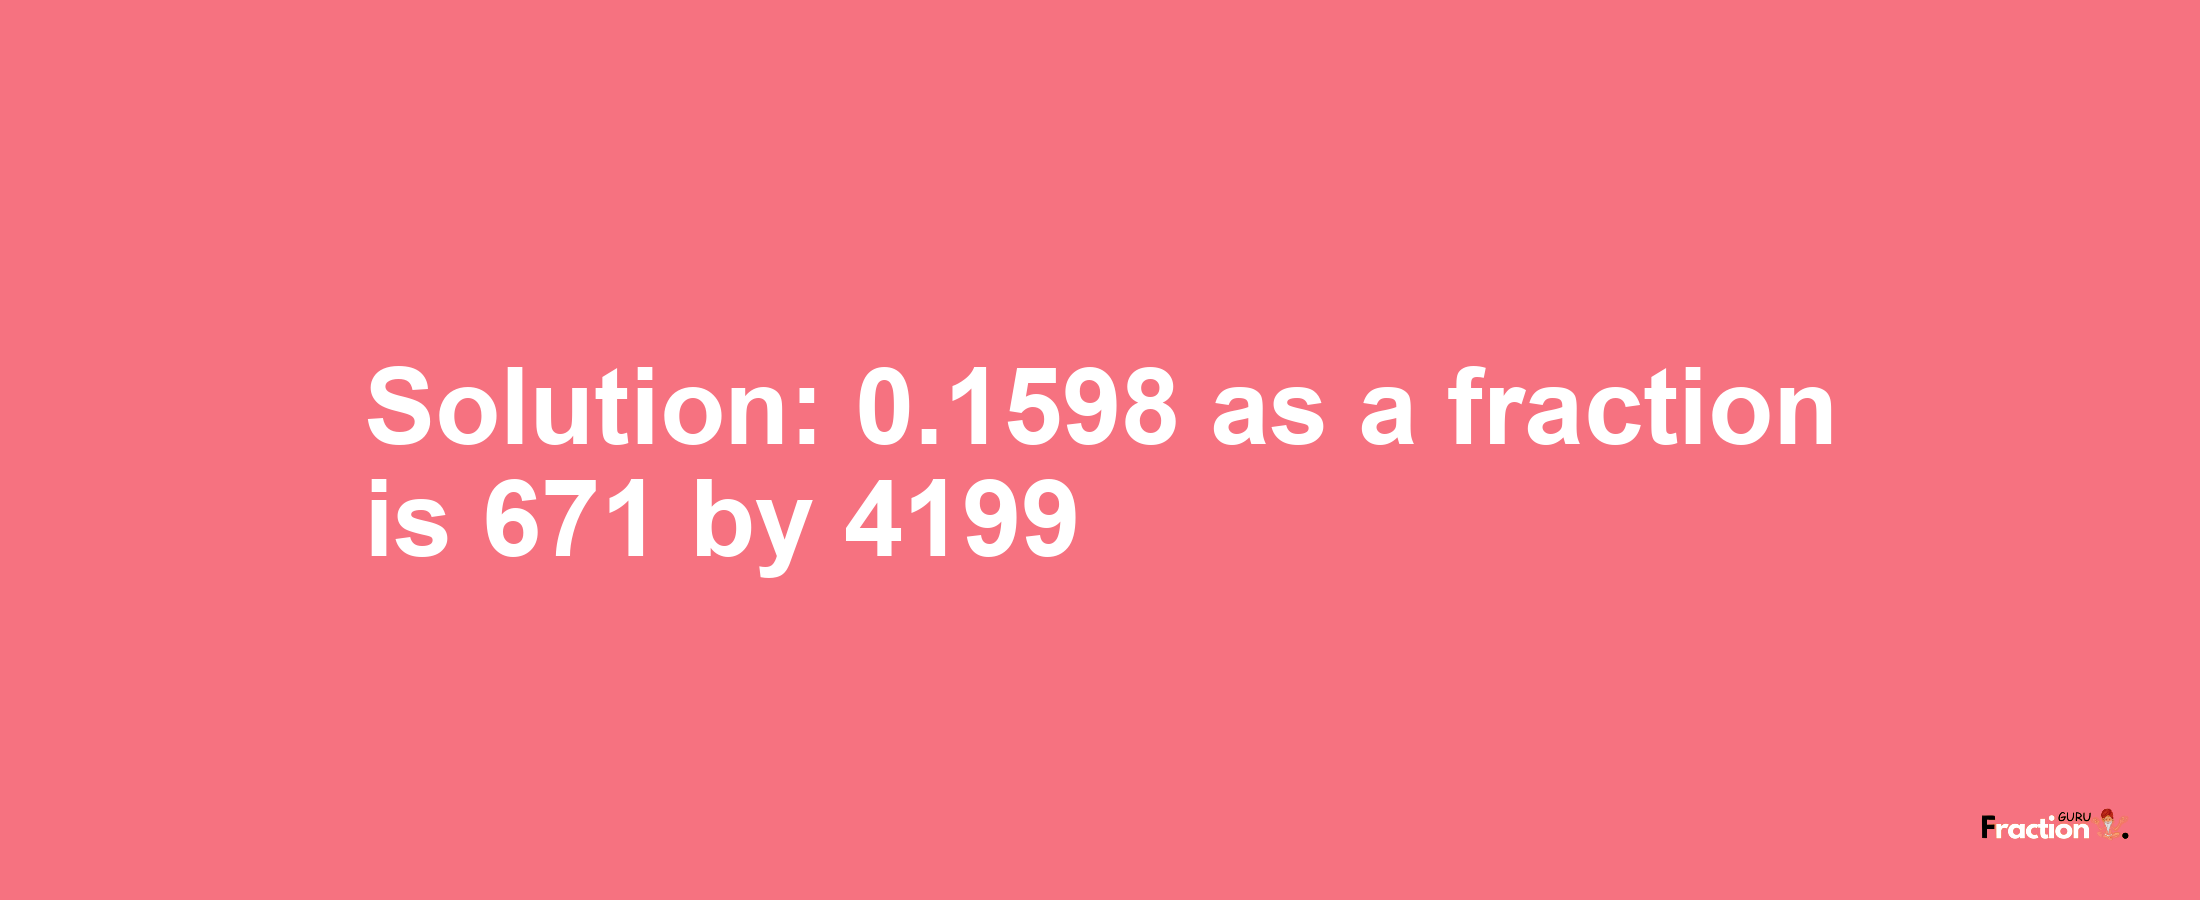 Solution:0.1598 as a fraction is 671/4199